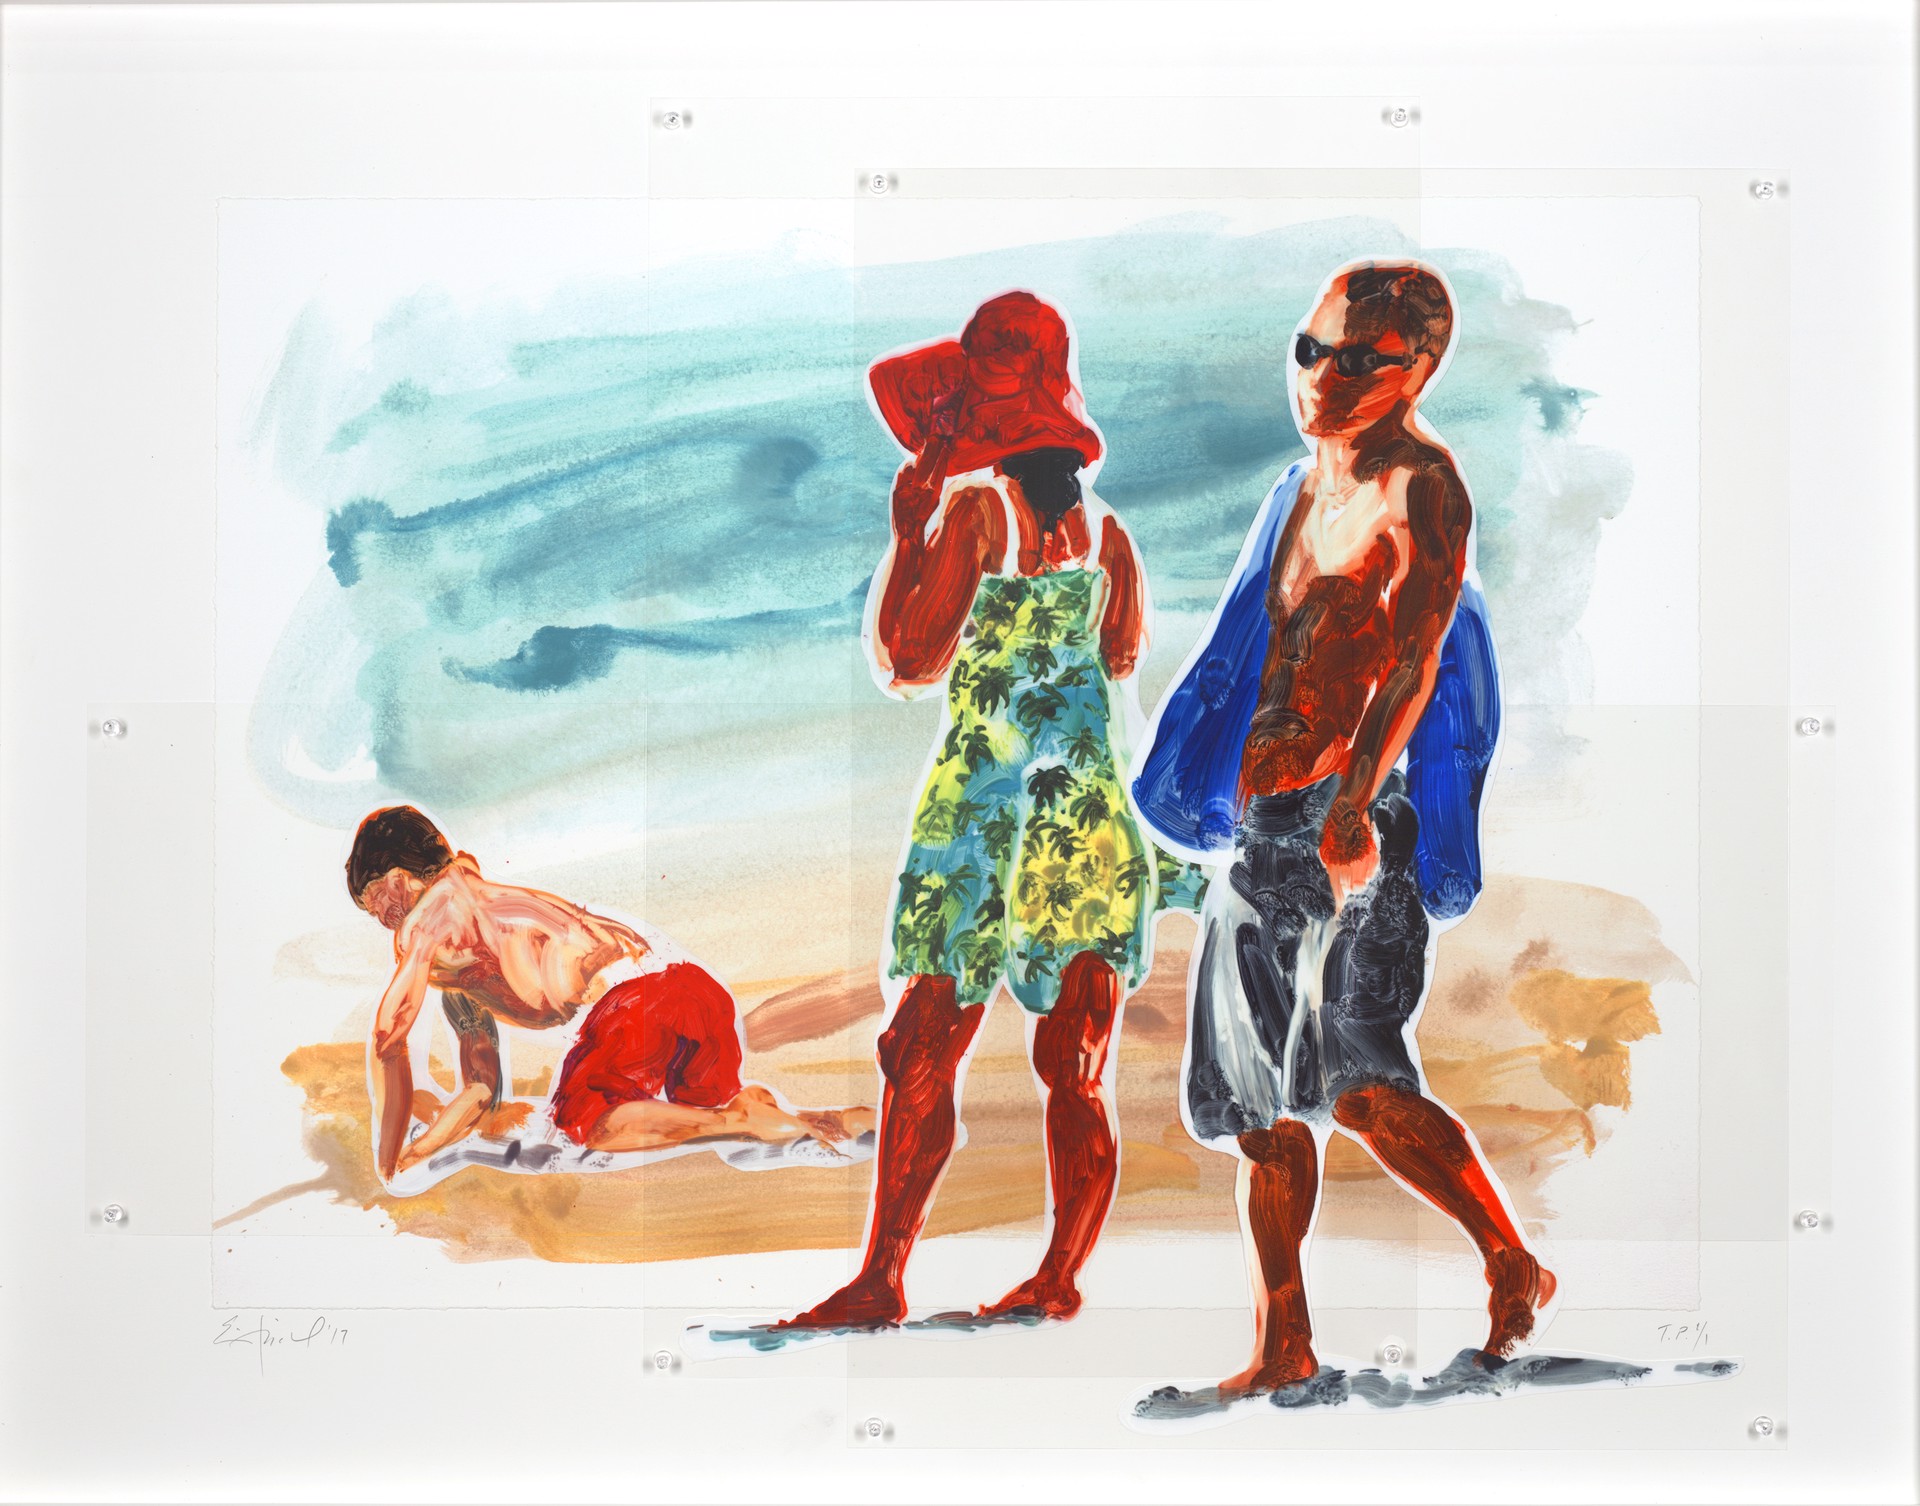 Man Woman and Boy by Eric Fischl